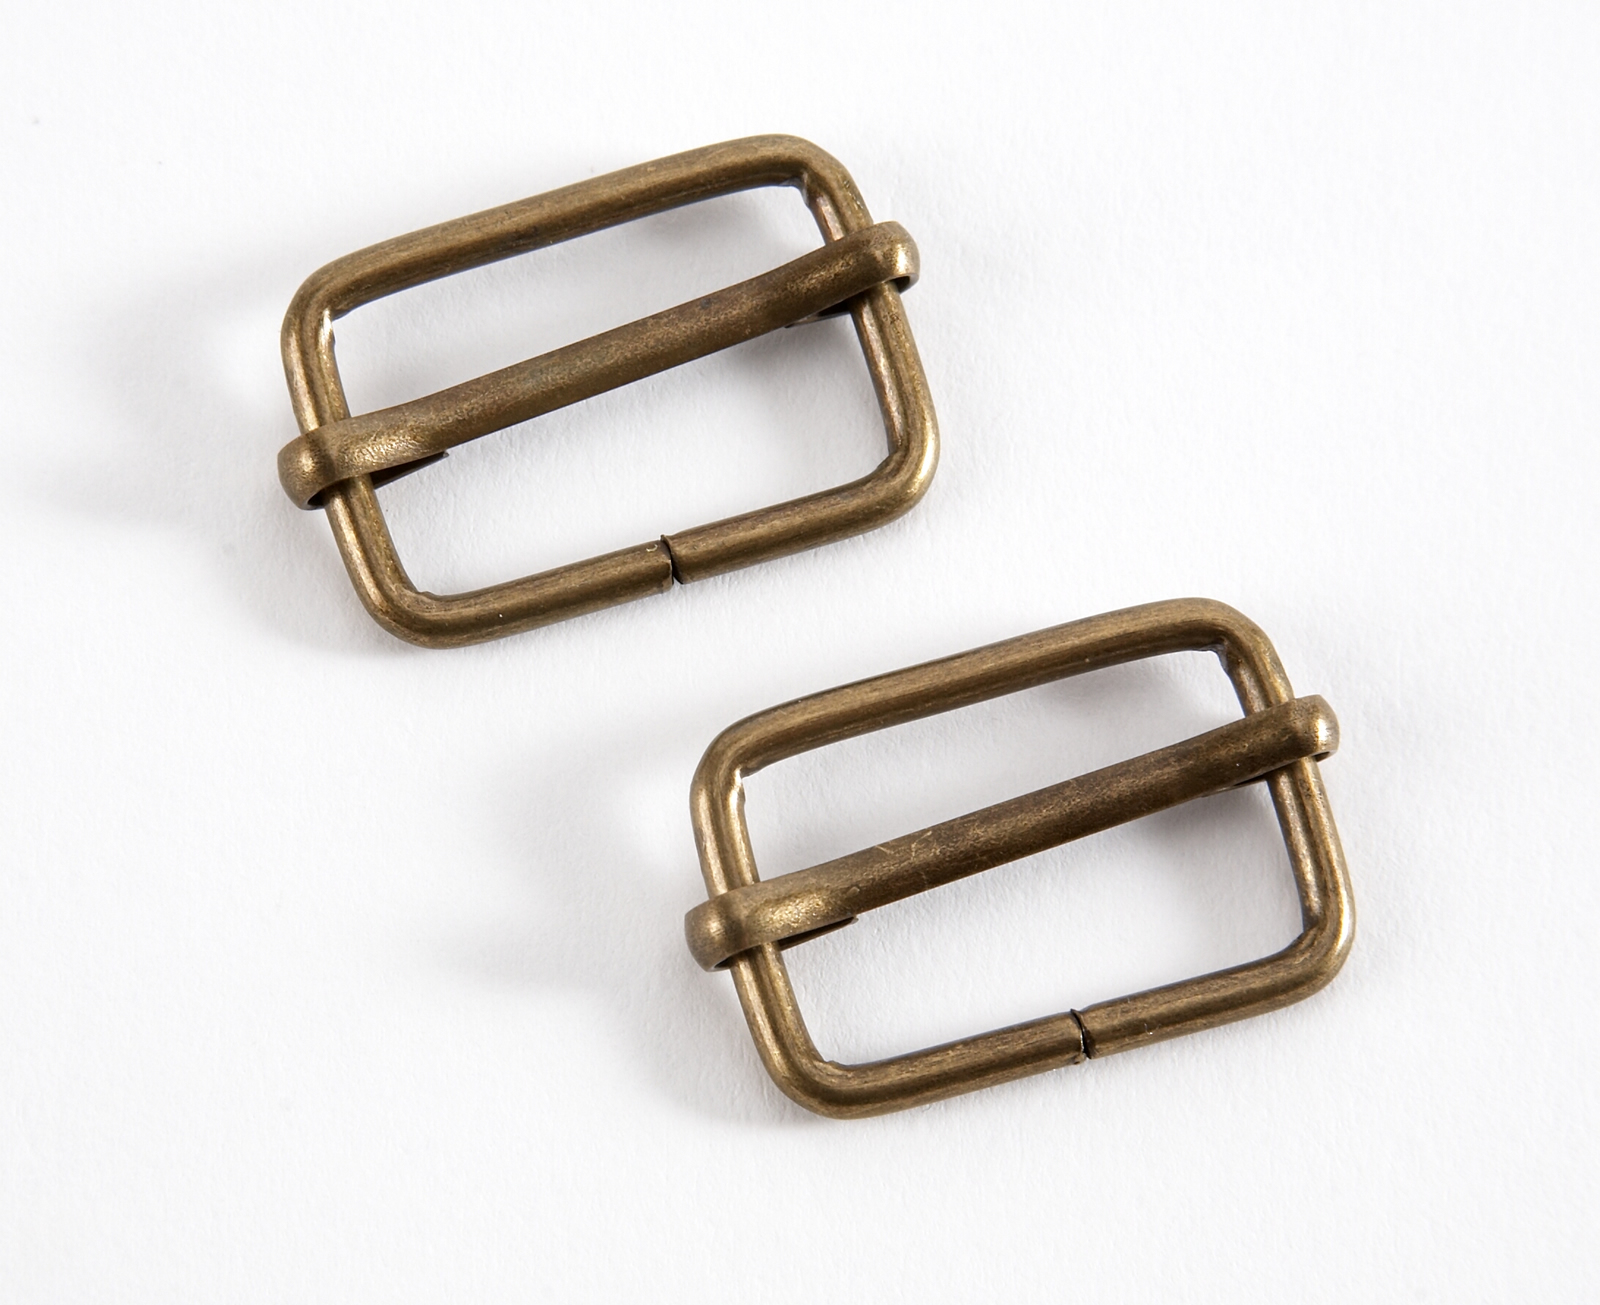 1" Gold Tone Sliders for Bag Straps - Pack of 2